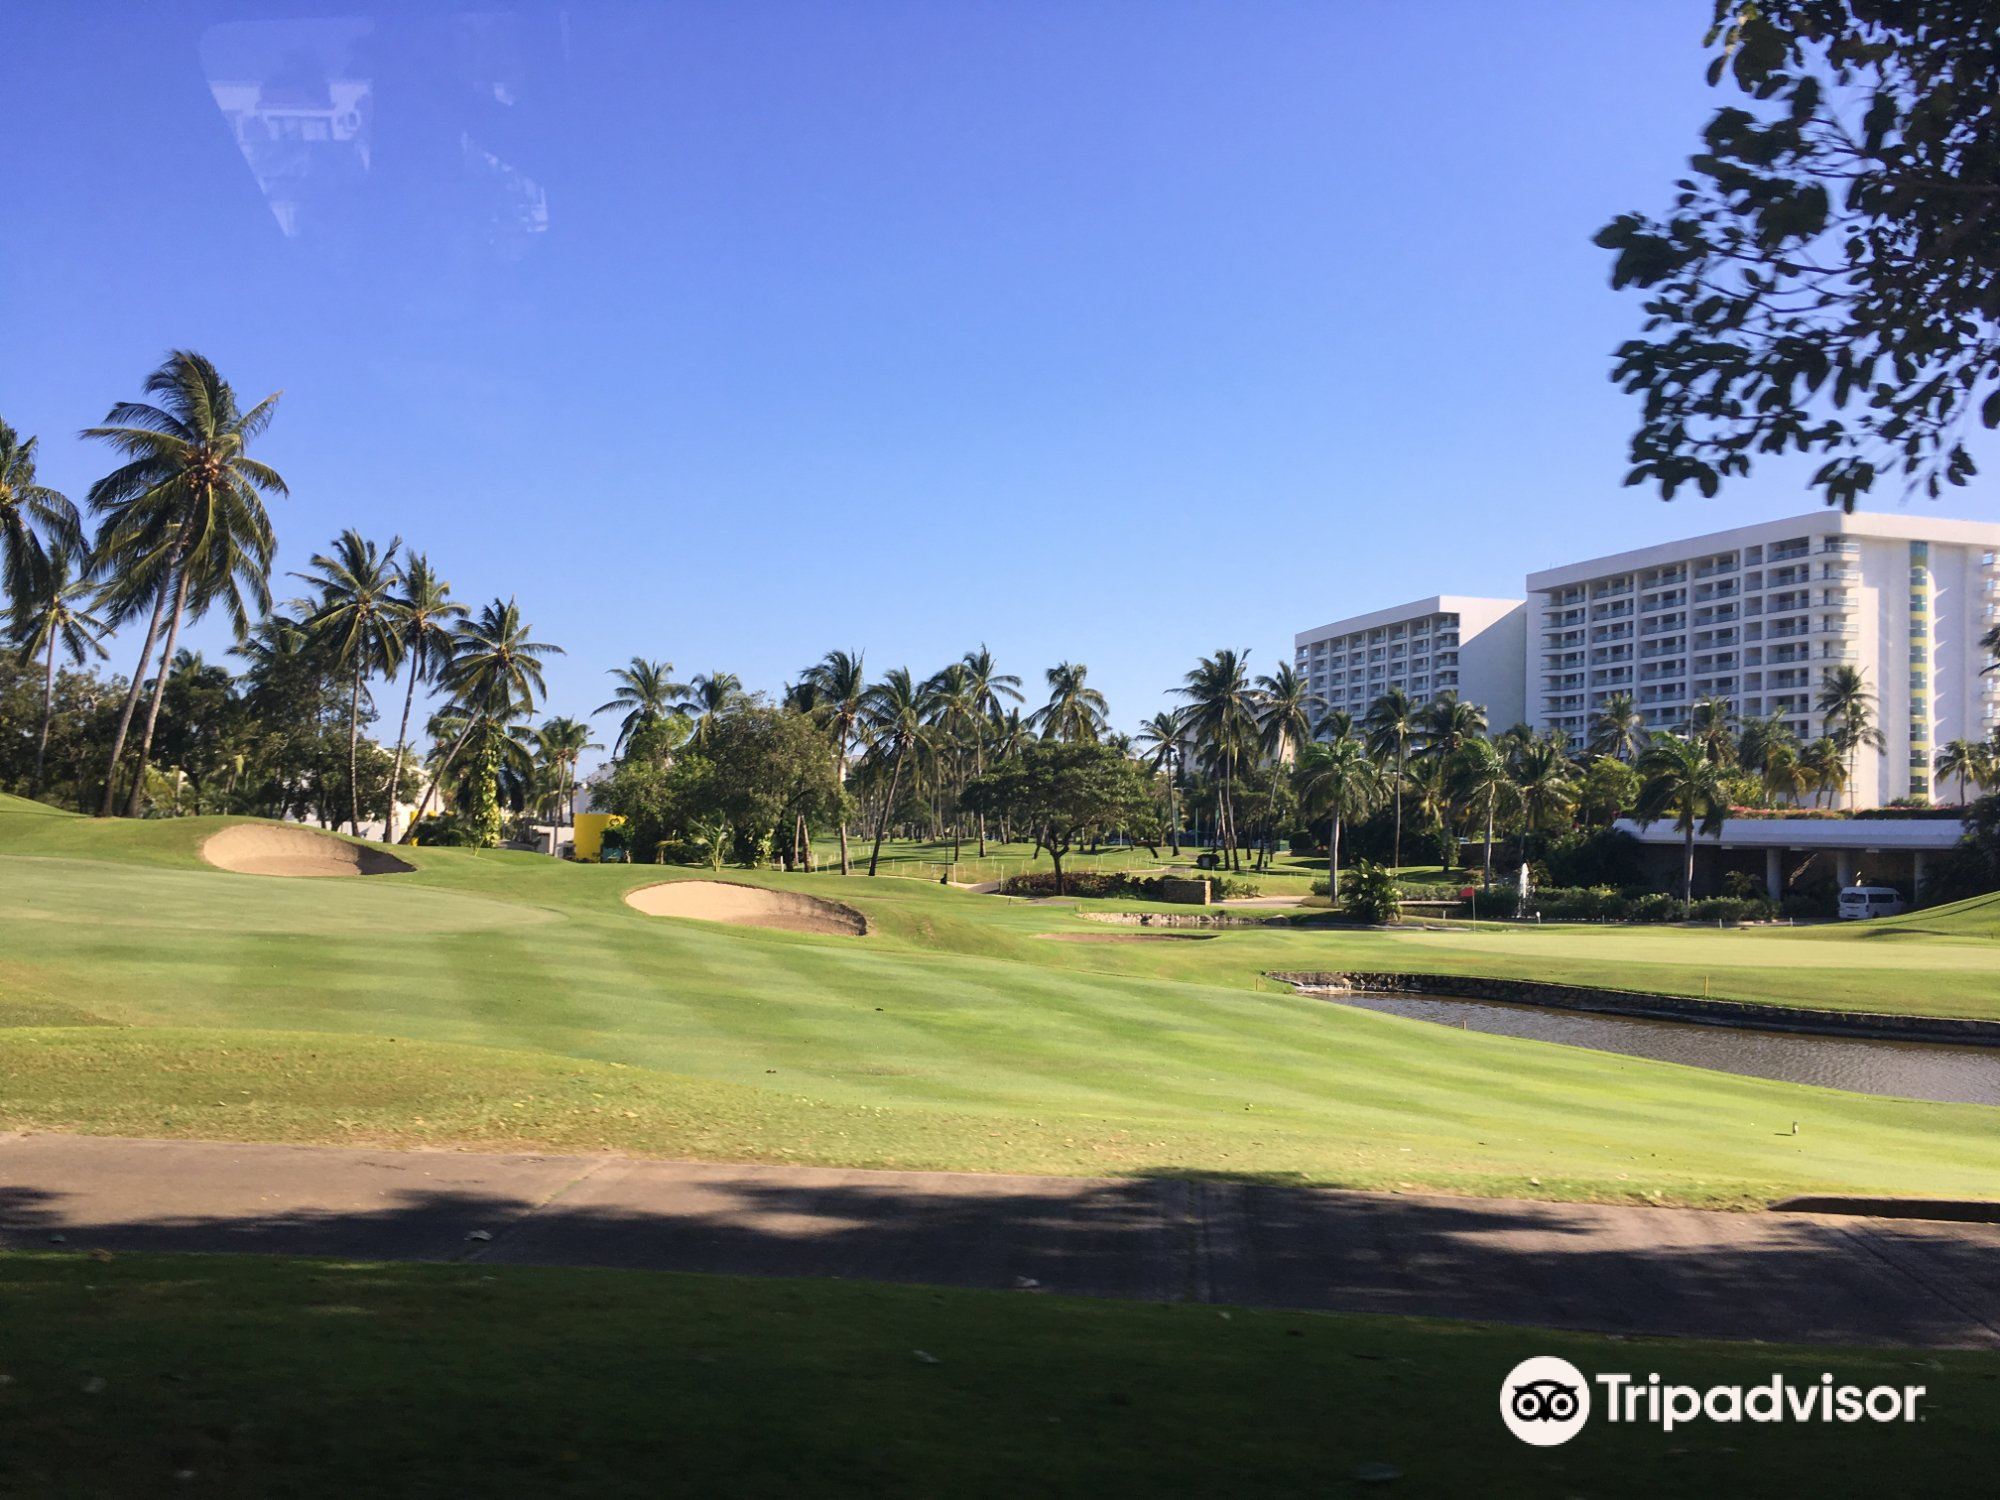 Vidanta Golf Acapulco attraction reviews - Vidanta Golf Acapulco tickets -  Vidanta Golf Acapulco discounts - Vidanta Golf Acapulco transportation,  address, opening hours - attractions, hotels, and food near Vidanta Golf  Acapulco 